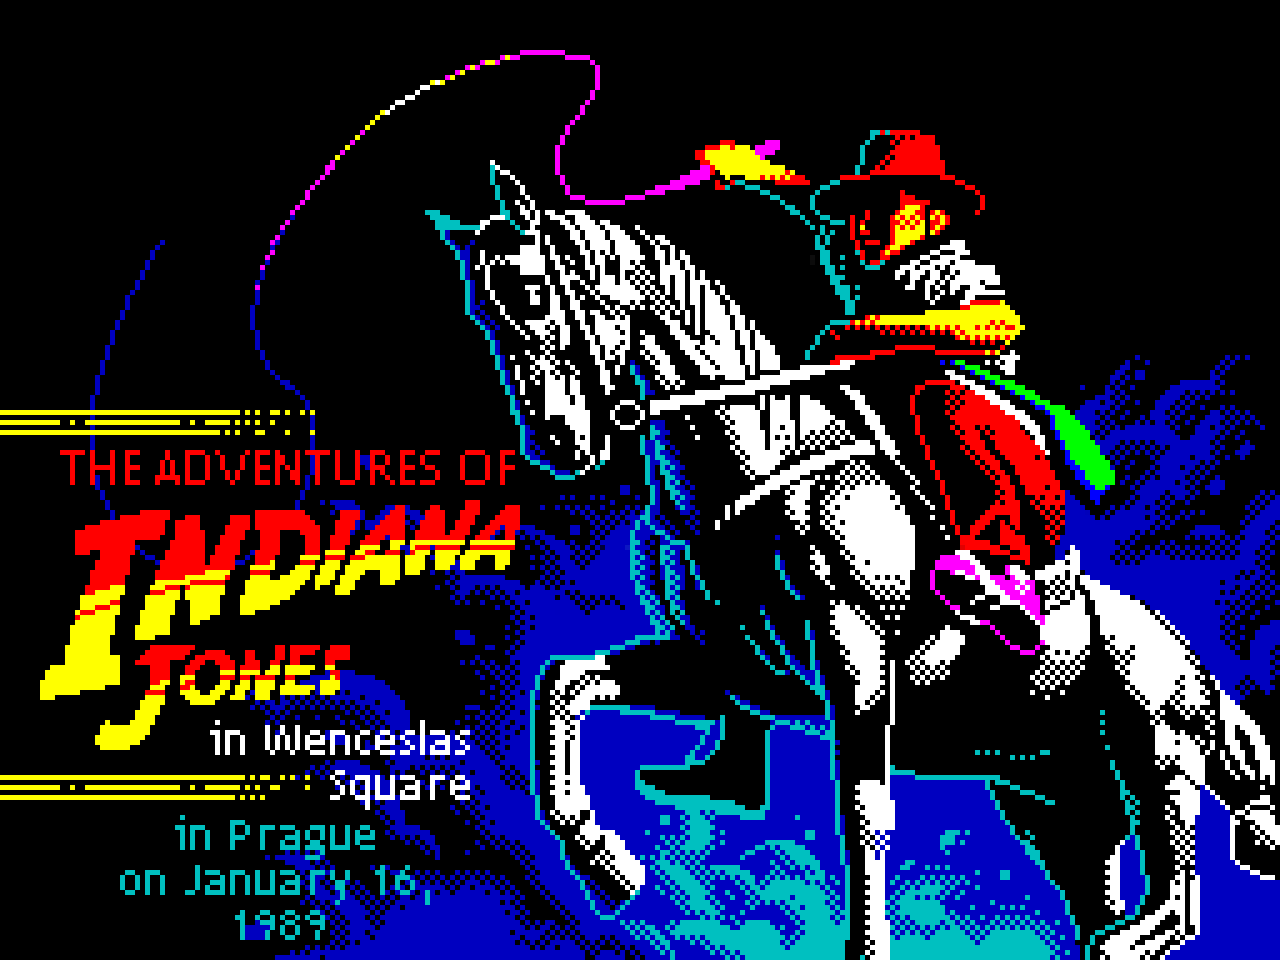 You can now play the unauthorized Indiana Jones video game created by Czechoslovak protestors in the 80s